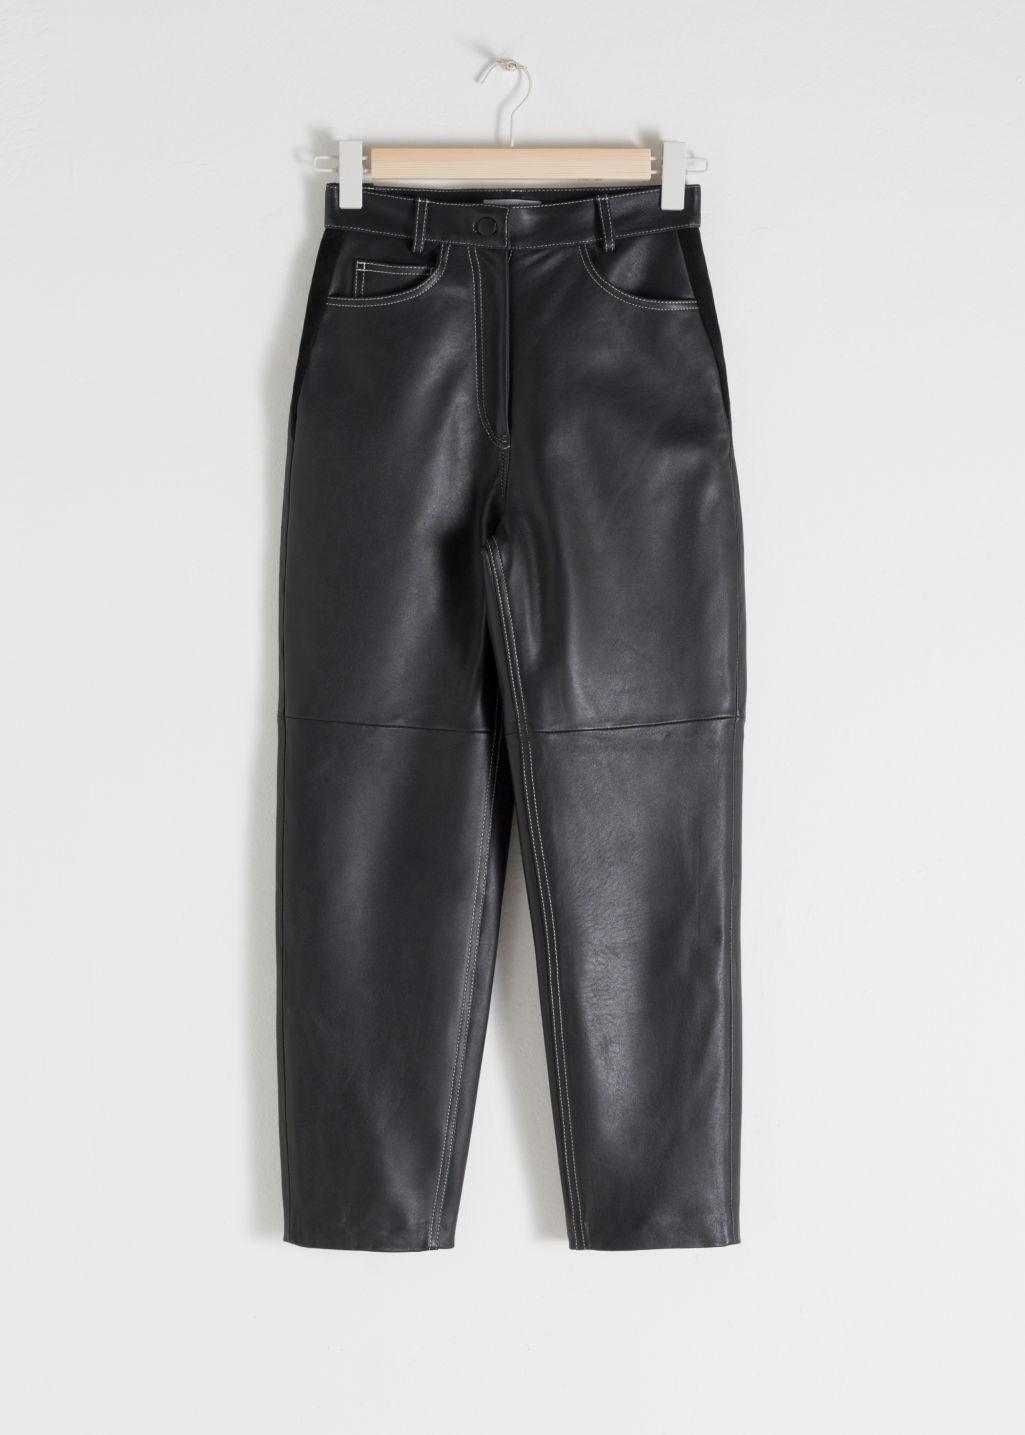 & Other Stories High Waisted Tapered Leather Trousers in Black - Lyst